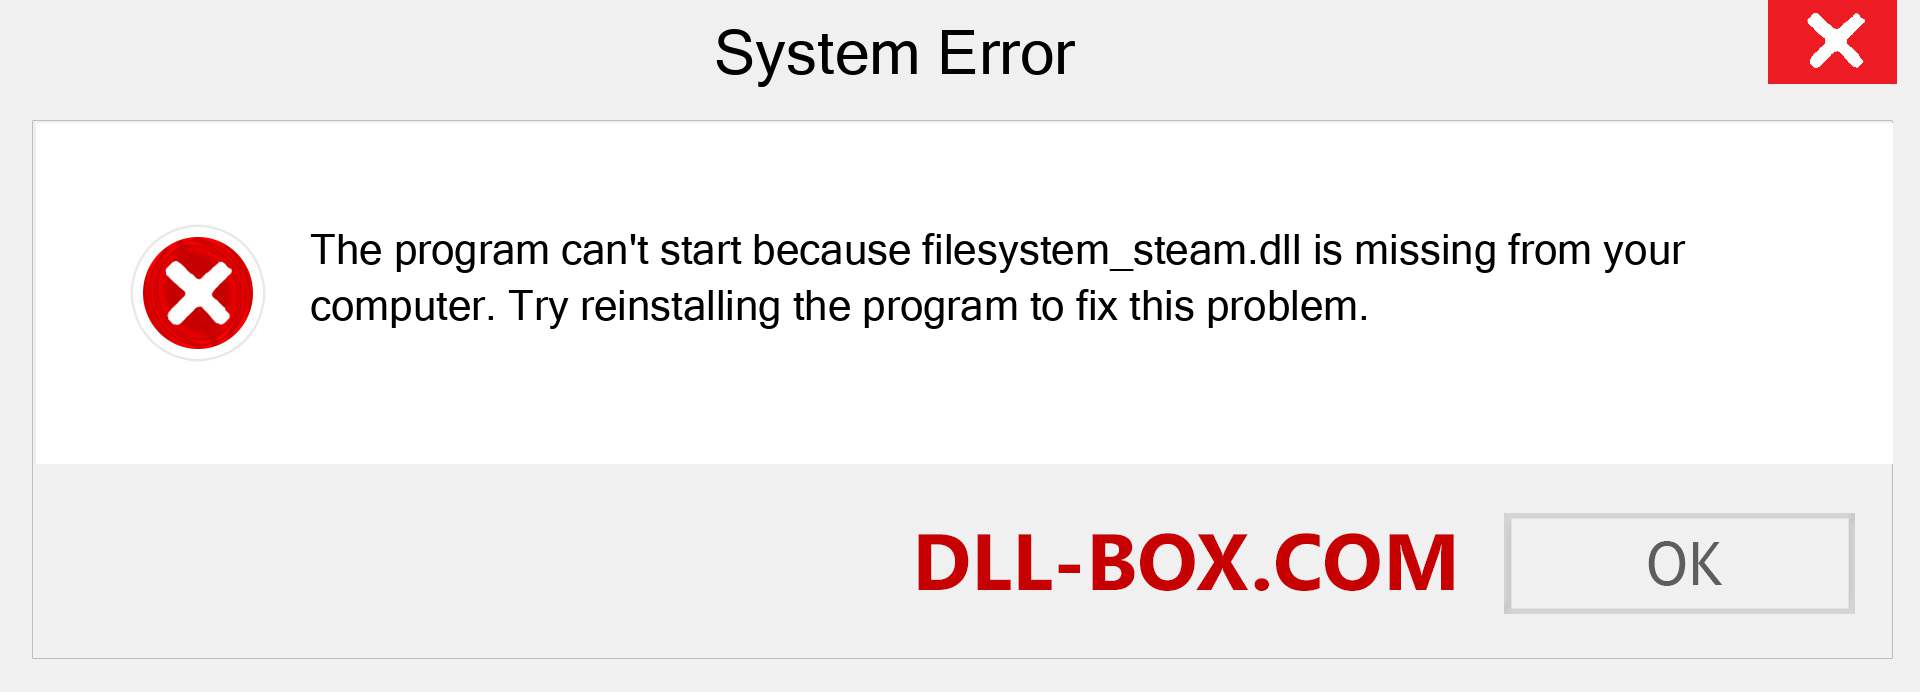  filesystem_steam.dll file is missing?. Download for Windows 7, 8, 10 - Fix  filesystem_steam dll Missing Error on Windows, photos, images